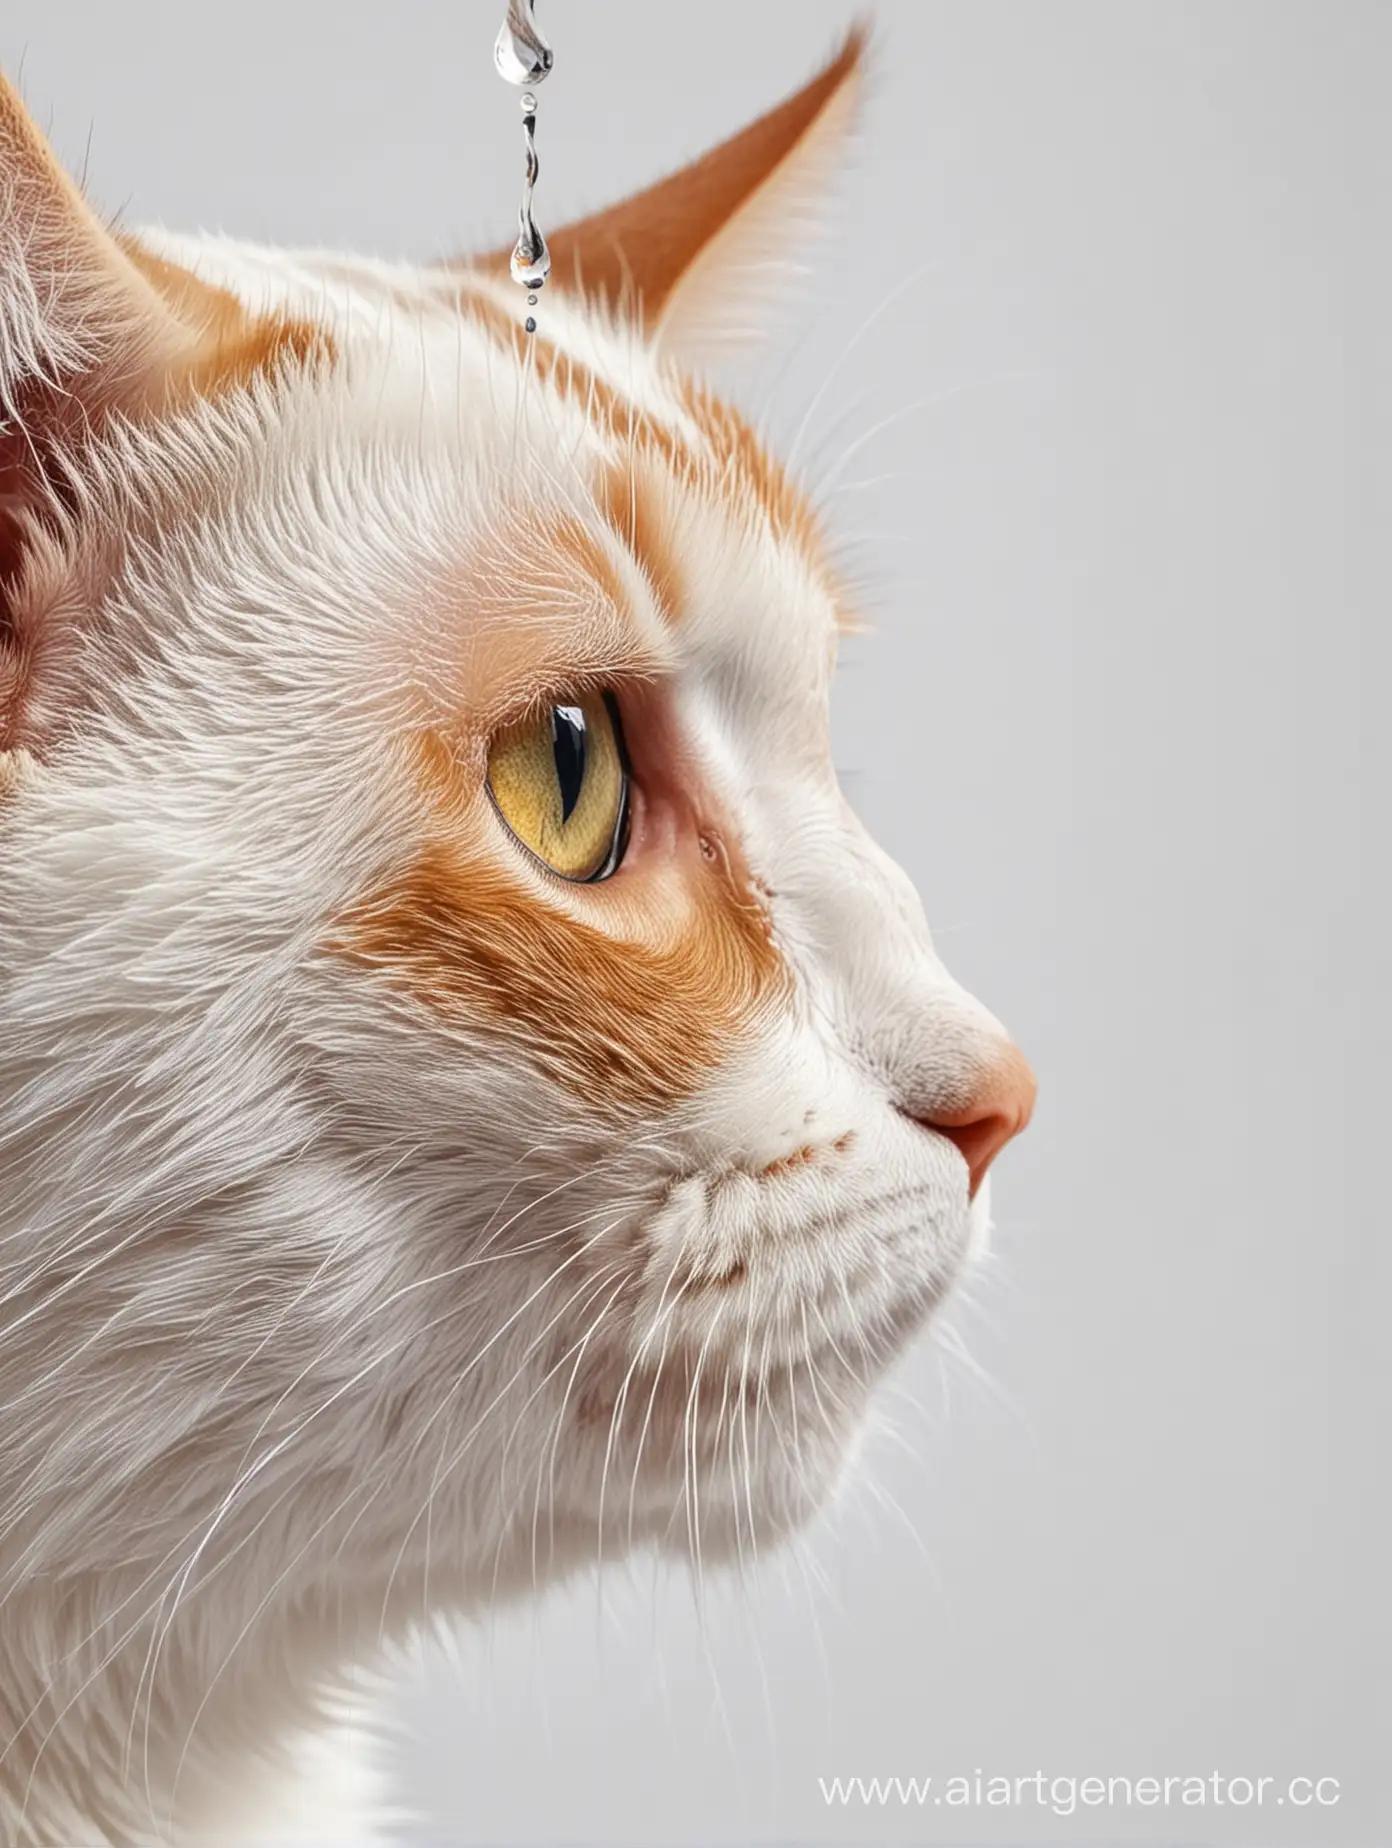 drip into the ears of cats ear droplets white background